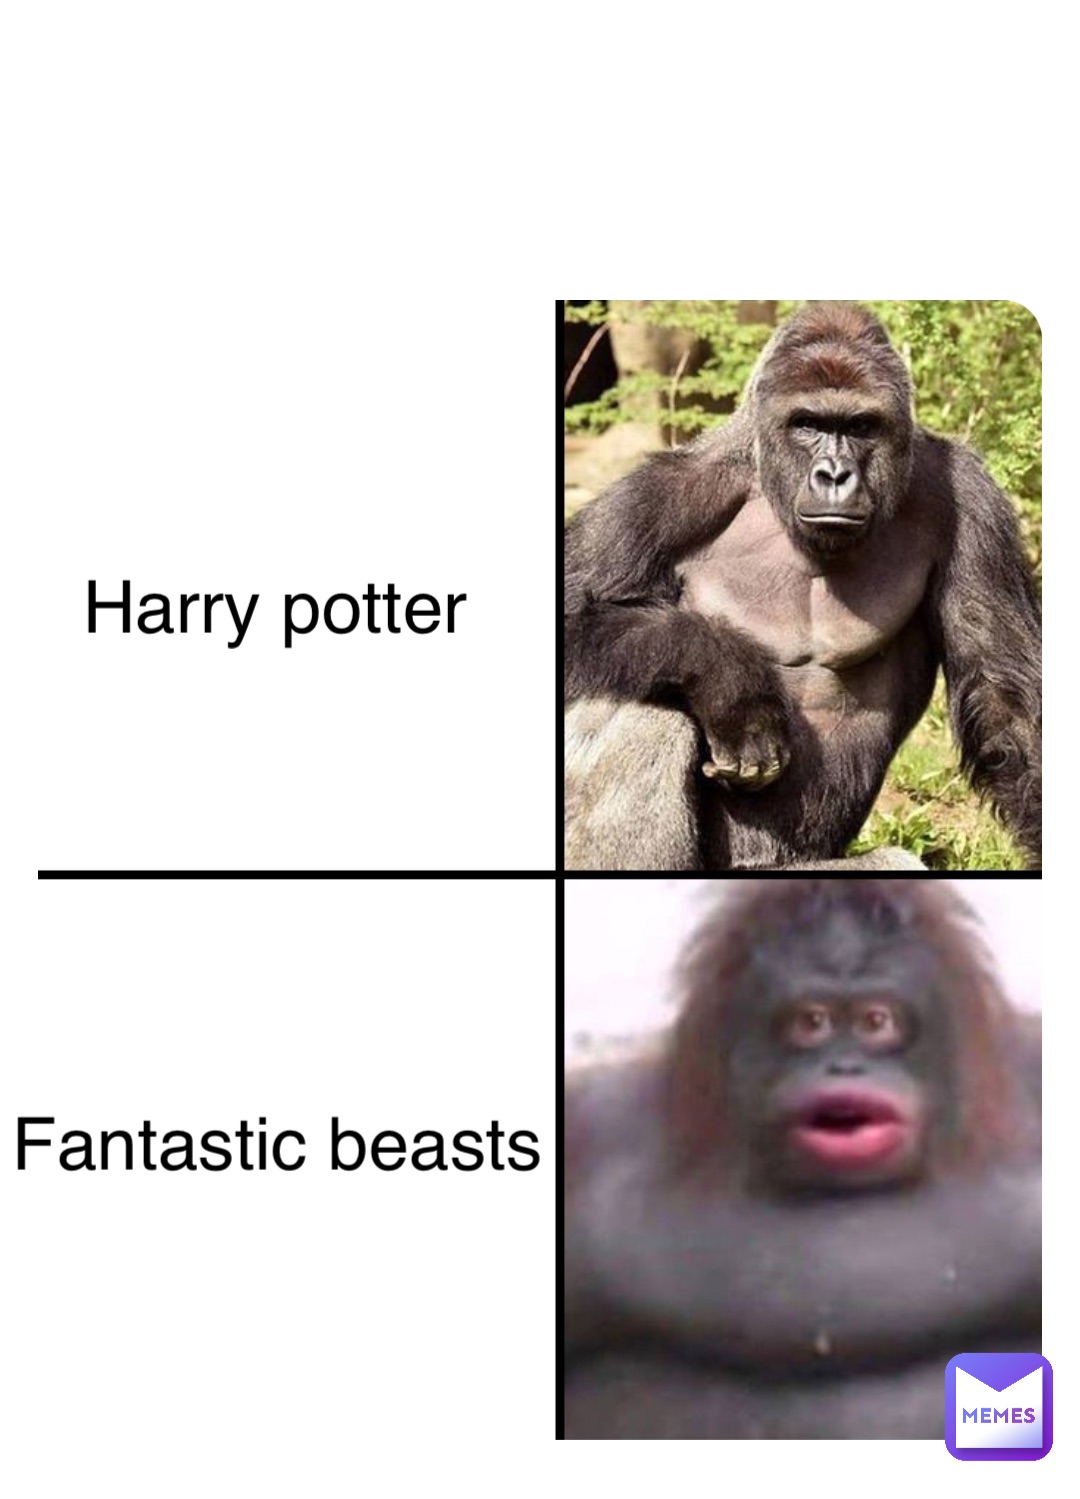 Double tap to edit Harry potter Fantastic beasts